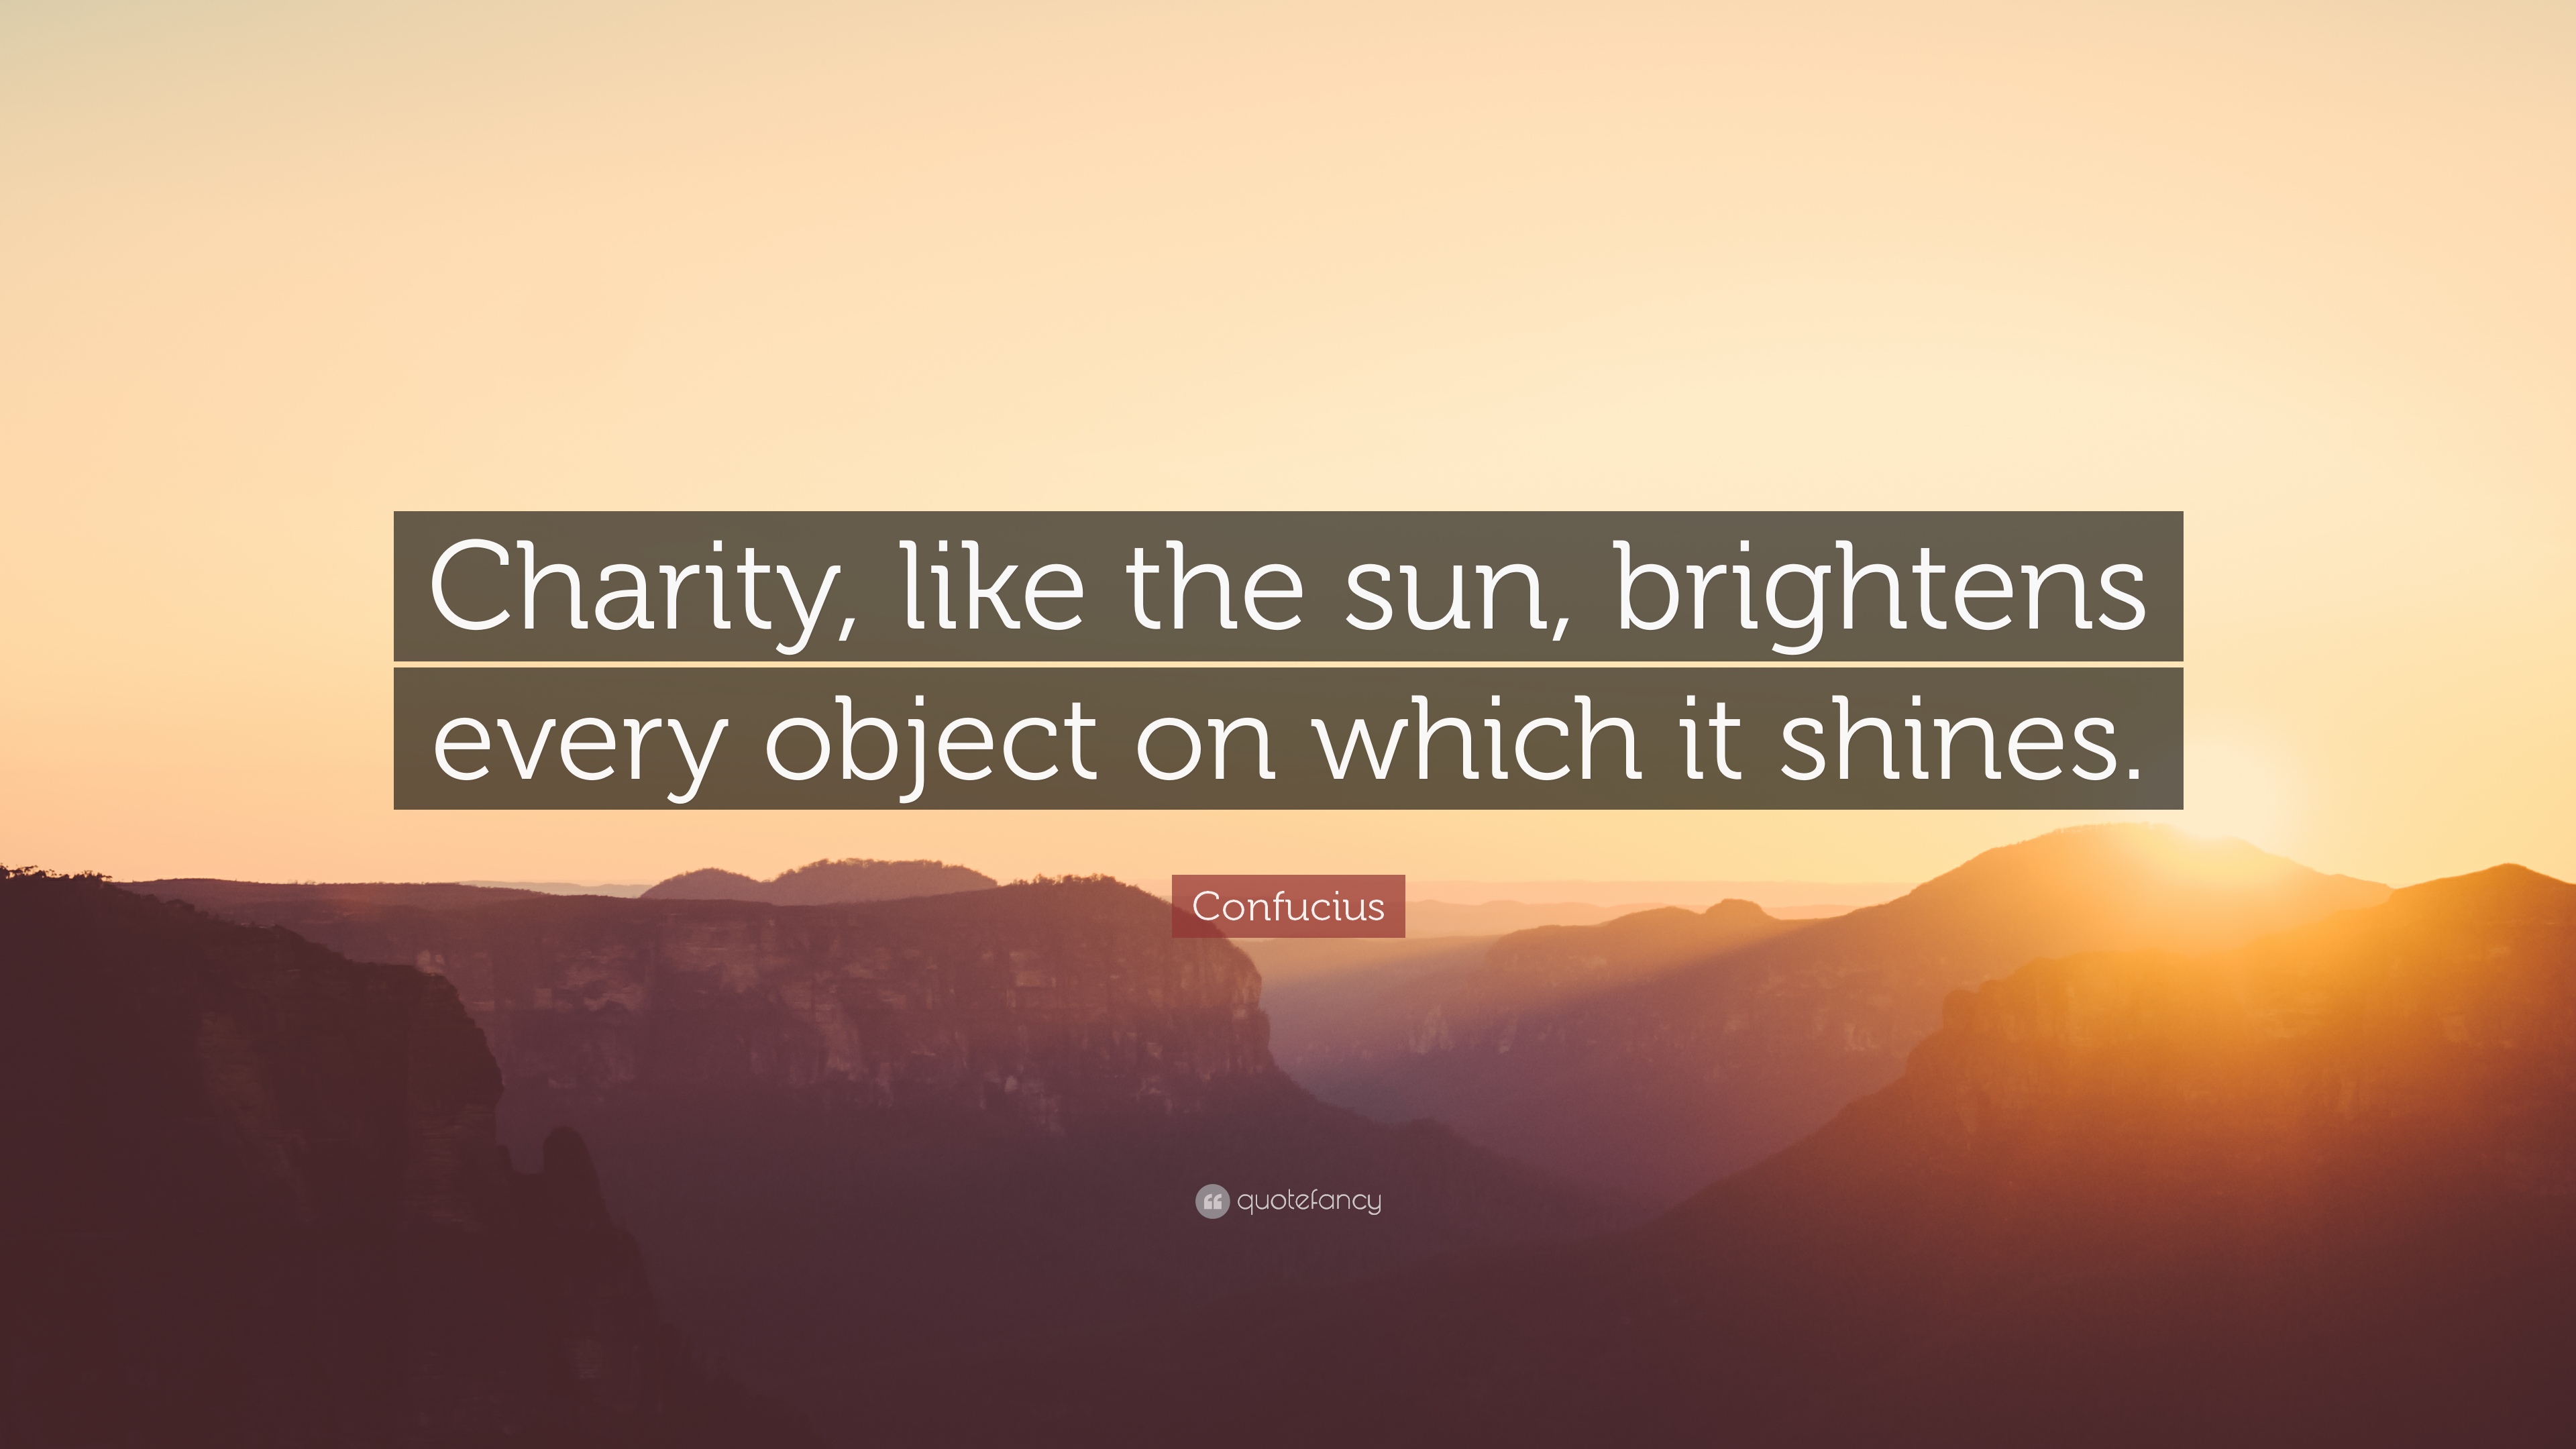 charity like the sun, brightens every object on which it shines. confucius